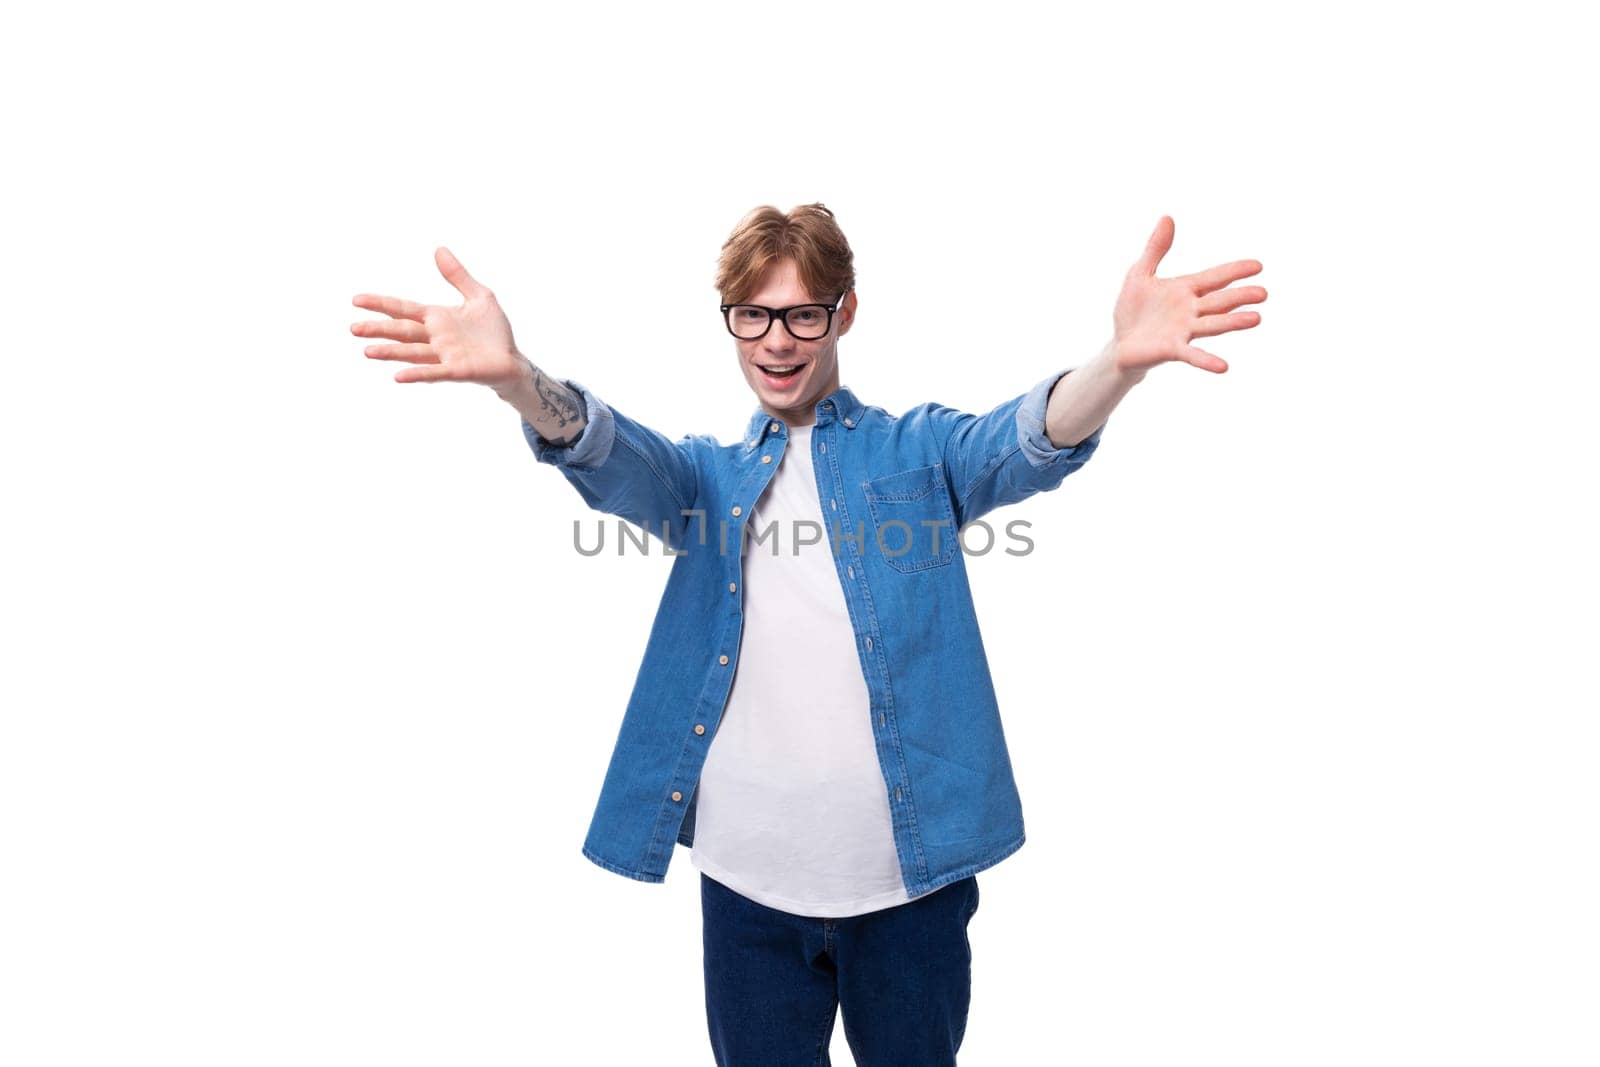 young joyful surprised red-haired guy dressed in a blue shirt wears glasses on a white background with copy space by TRMK